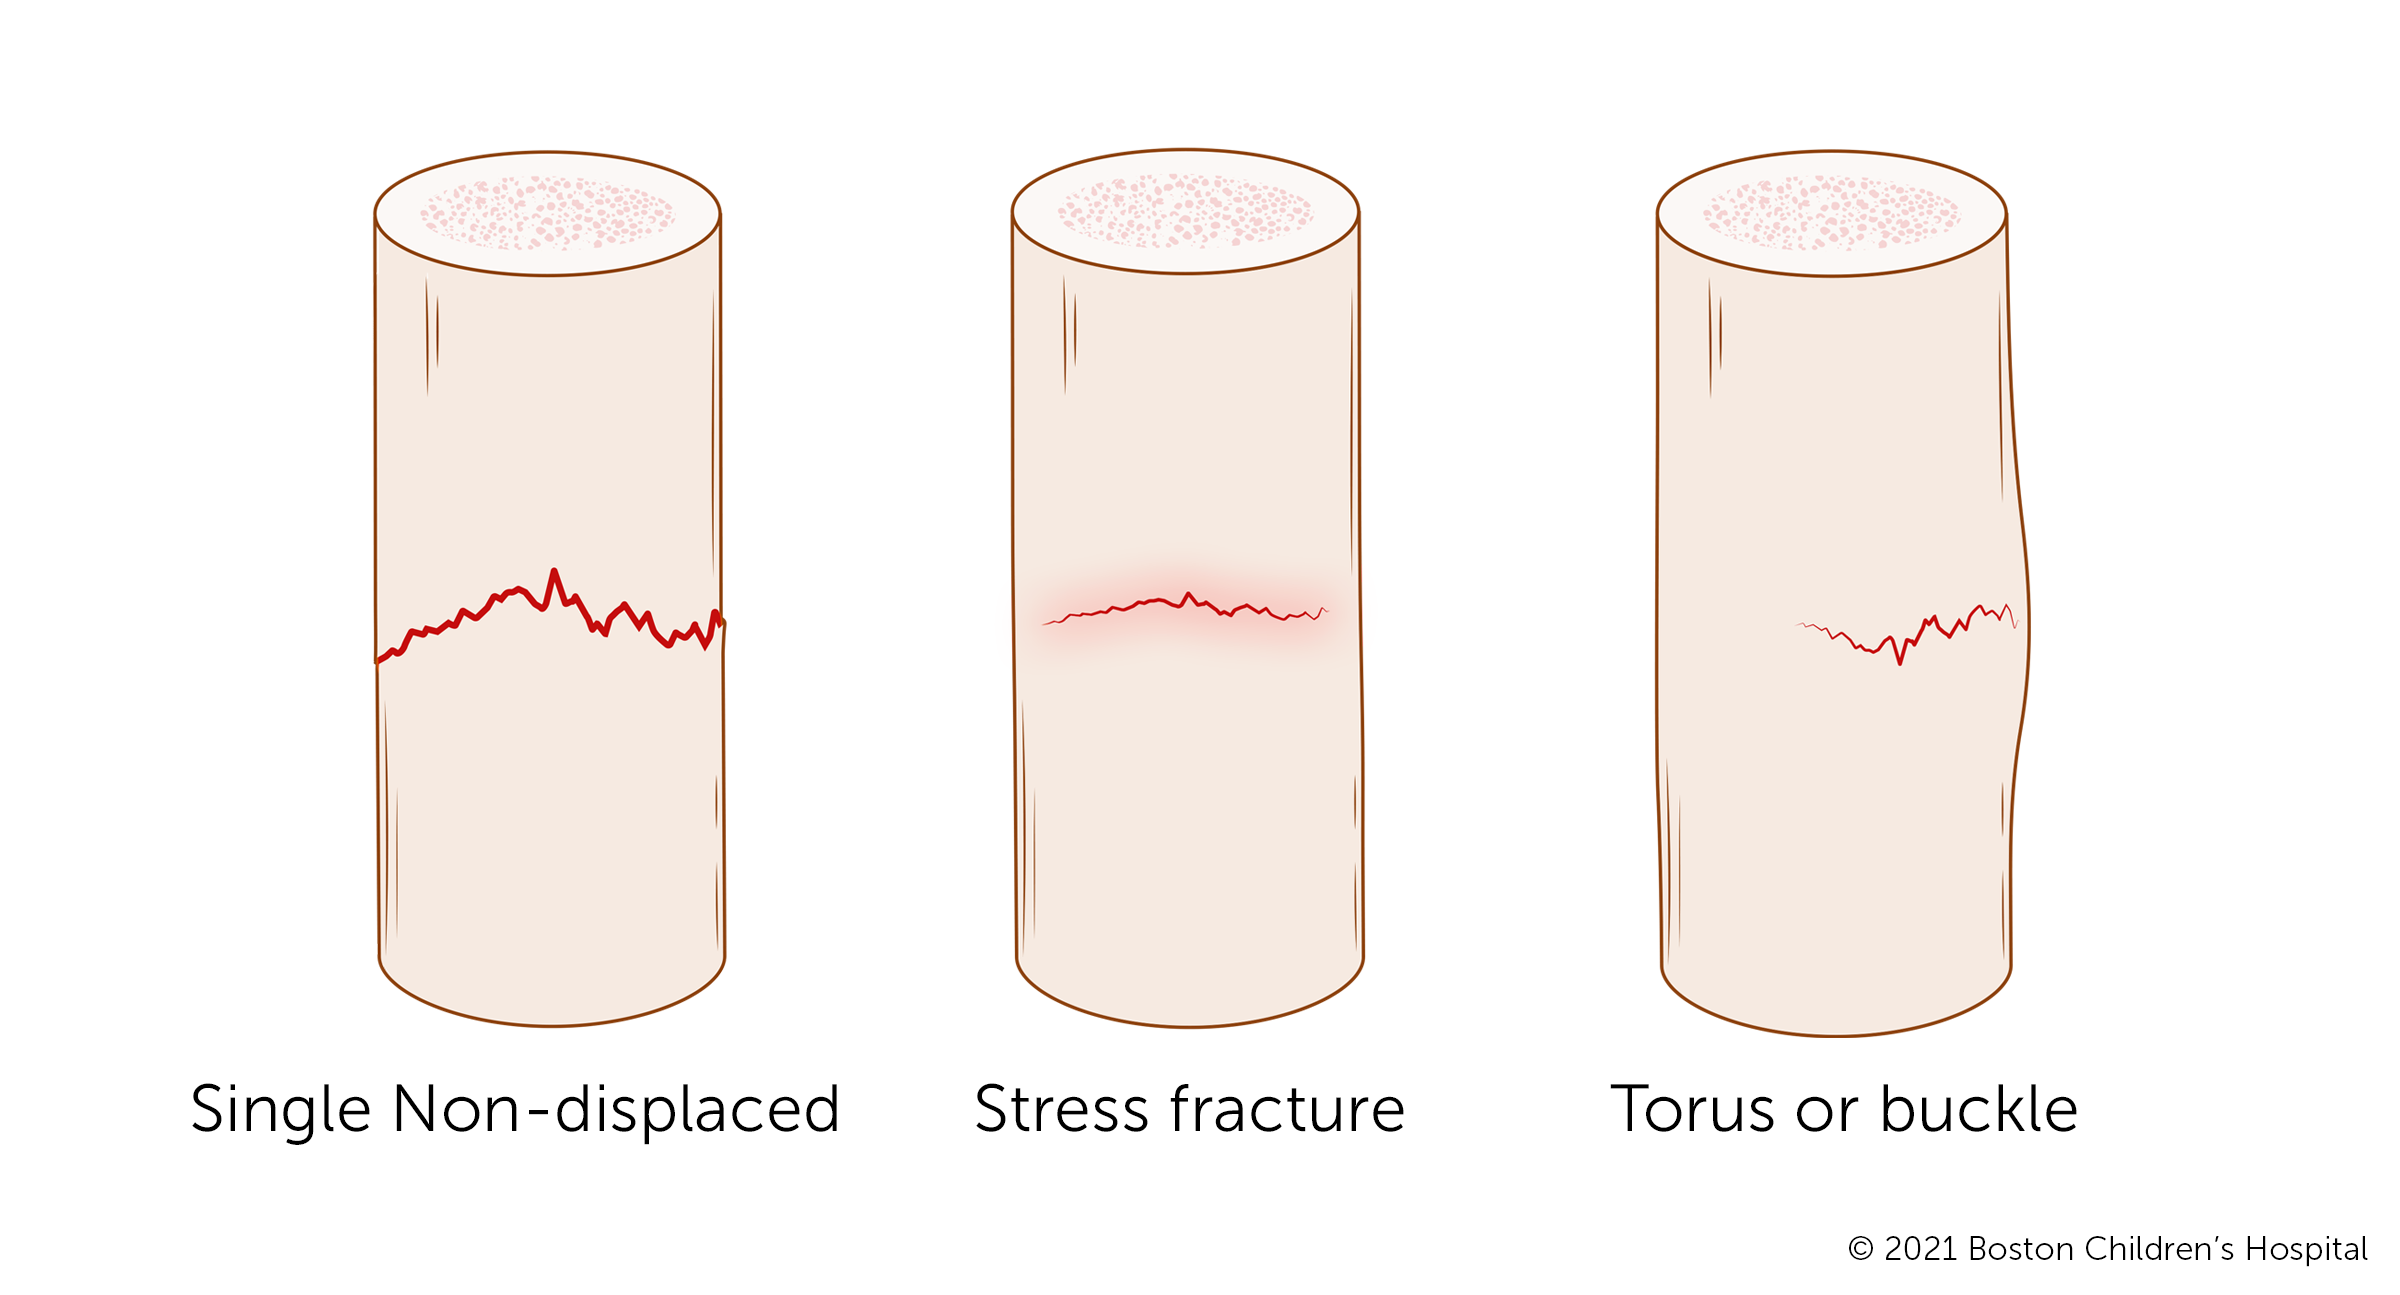 An illustration of non-displaced fractures